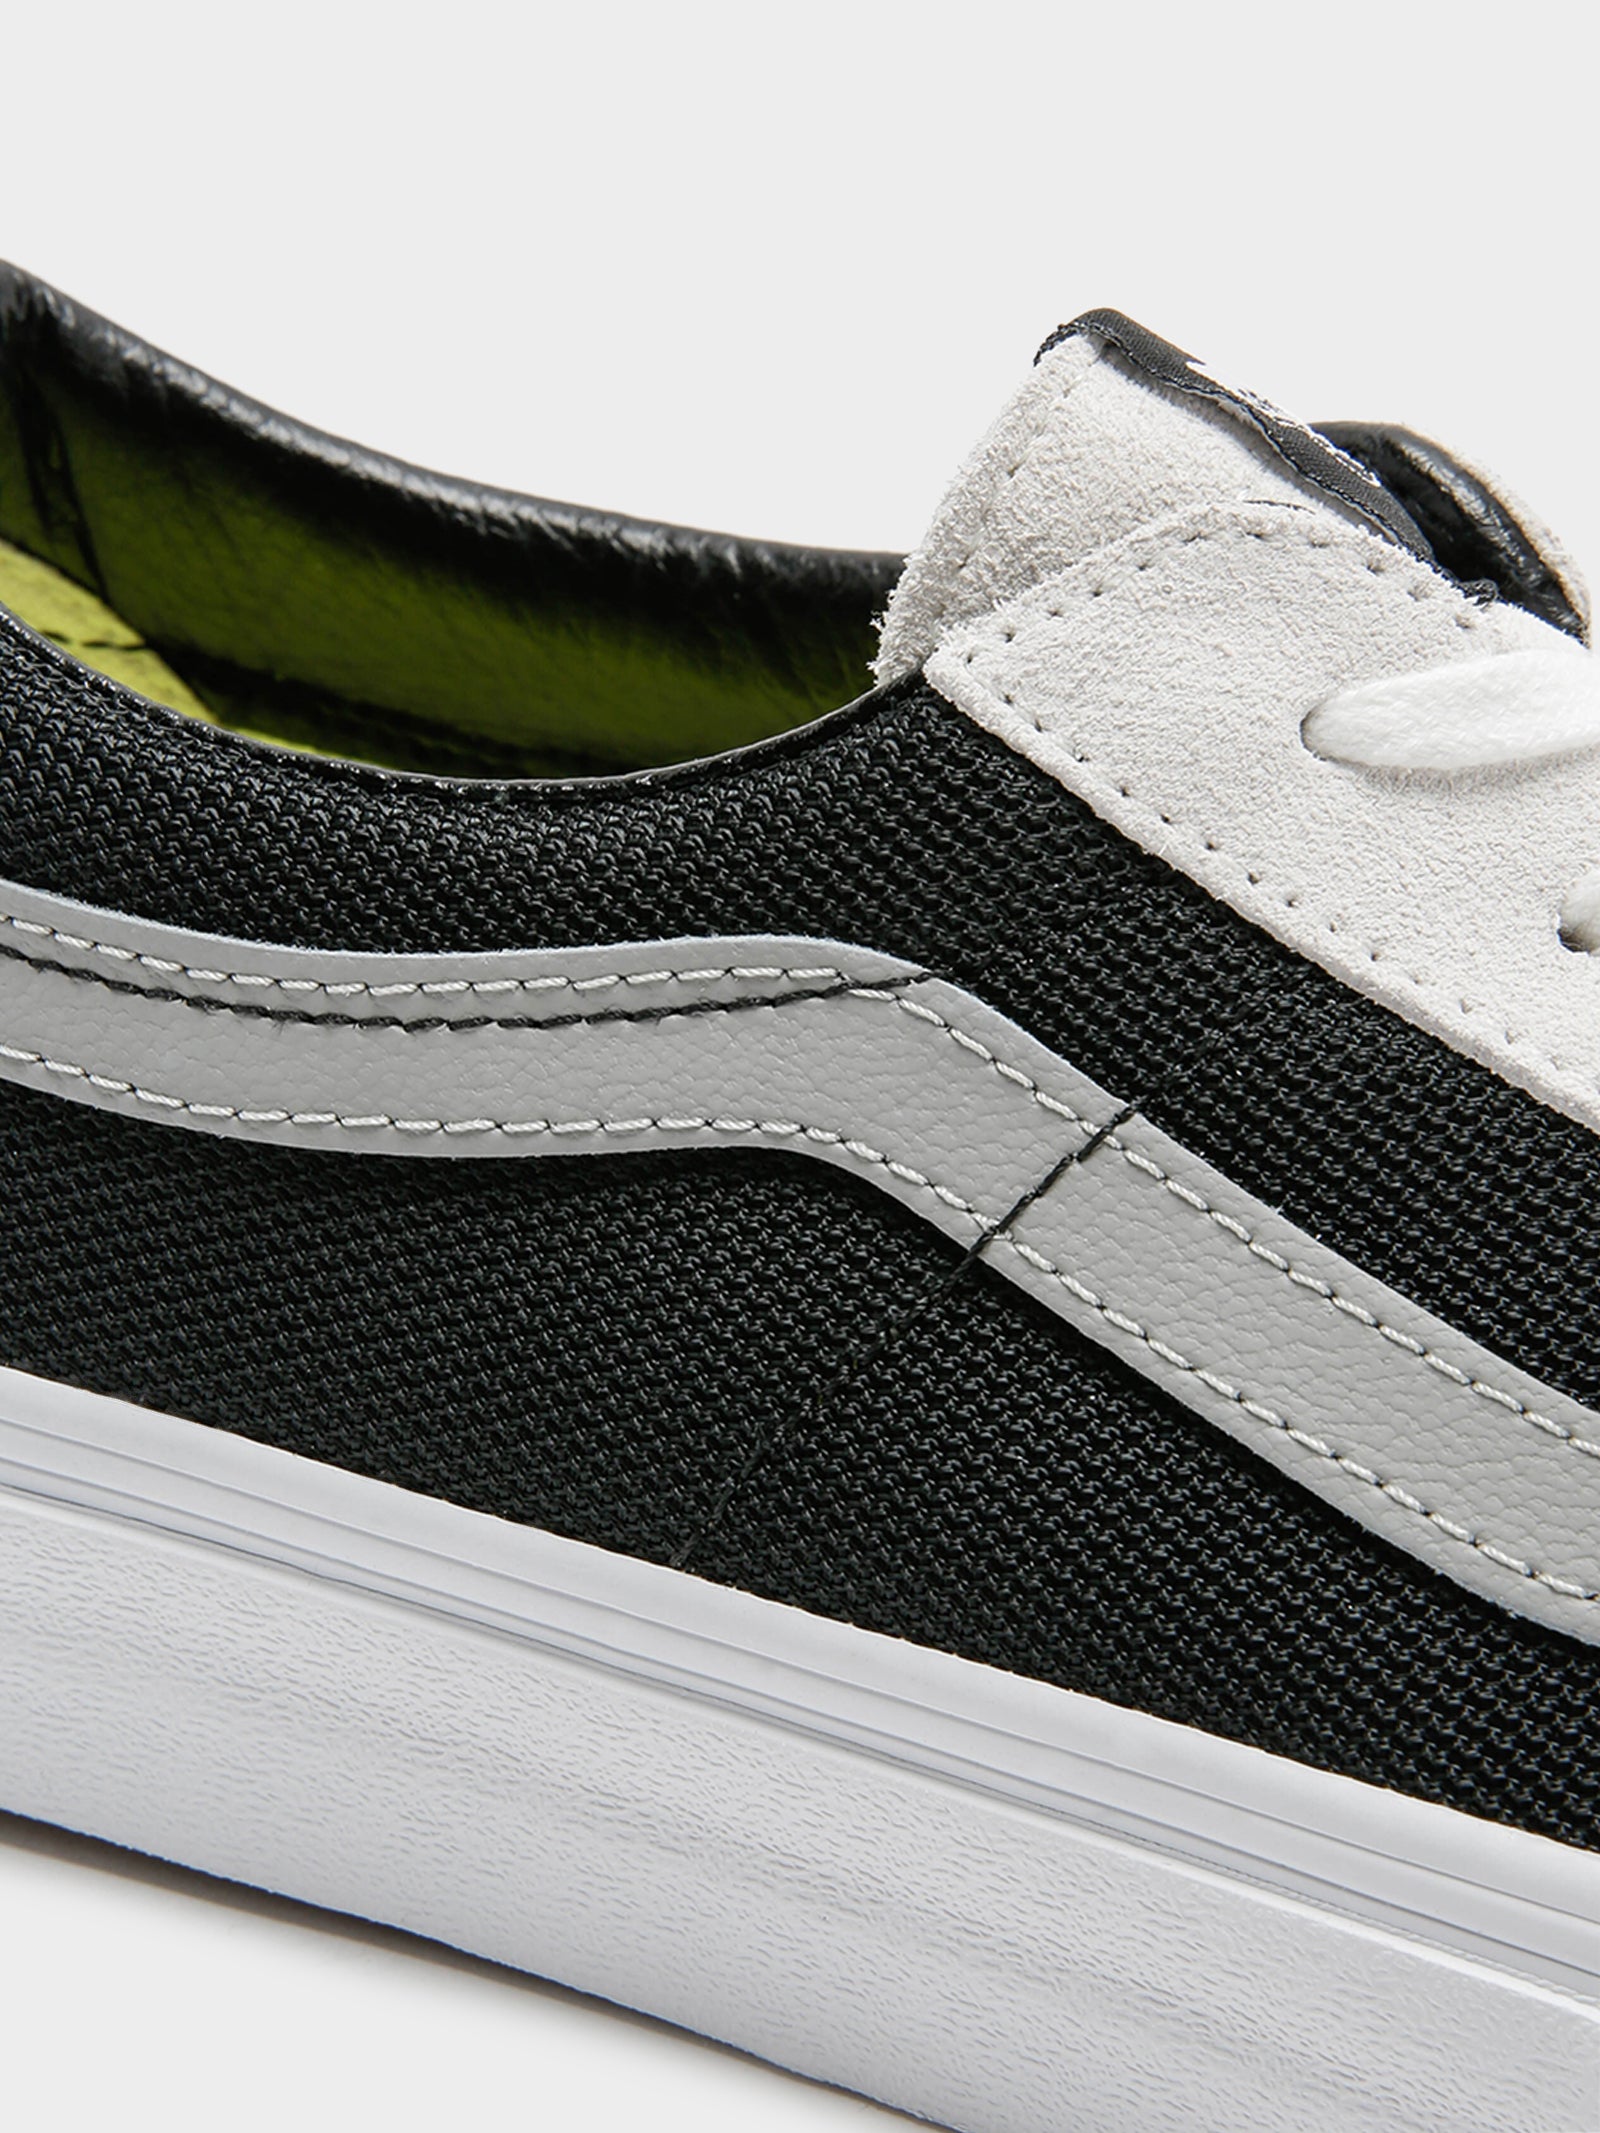 Unisex Sk8 Low Two Tone Sneakers in White & Black